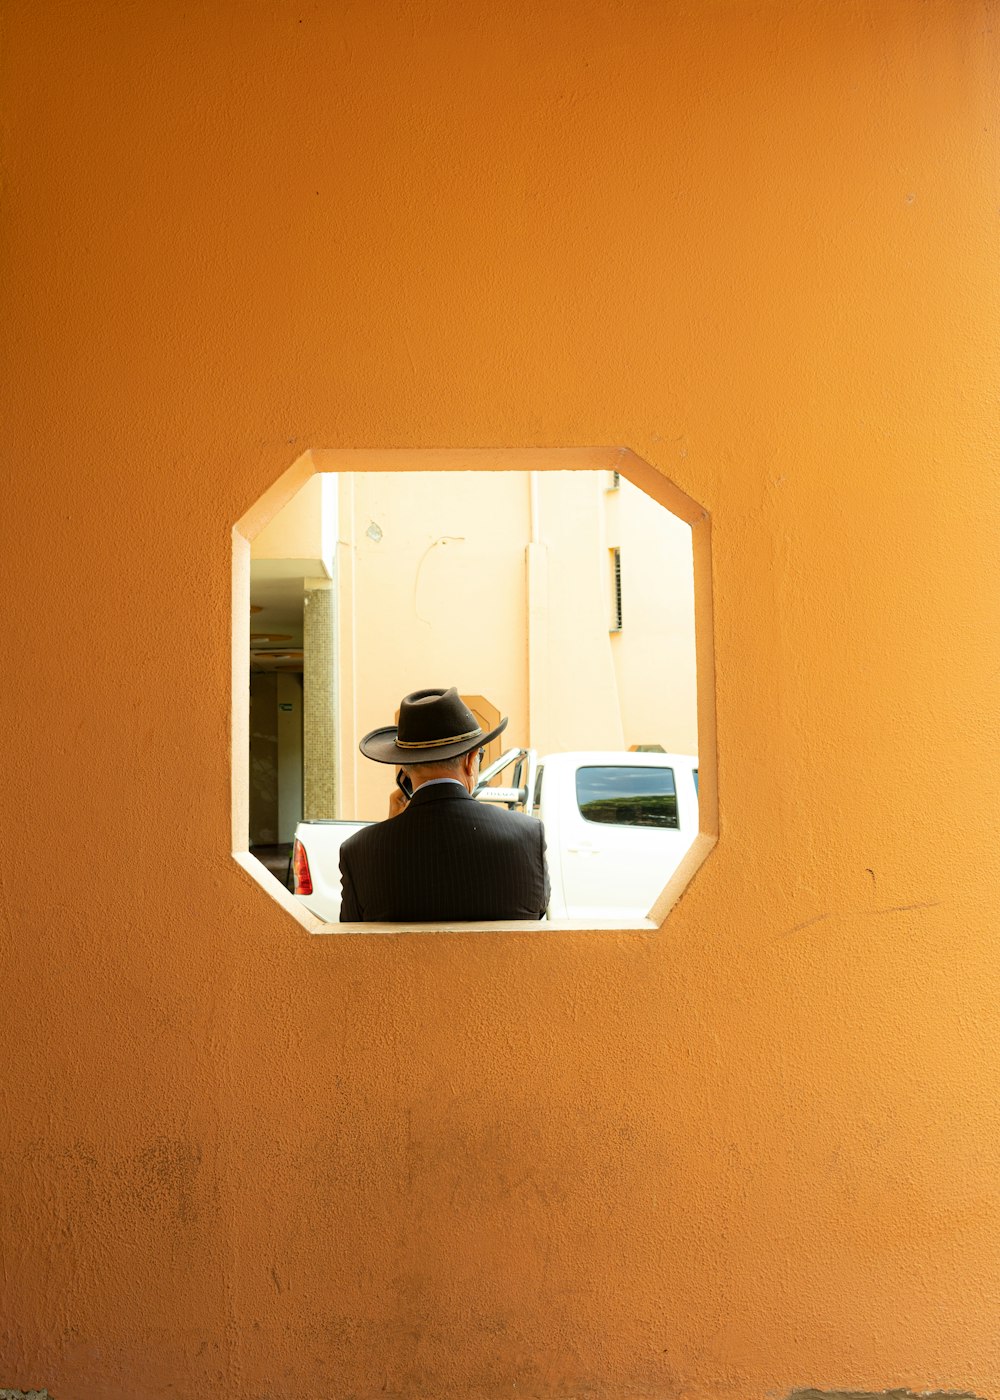 a person in a hat looking out a window